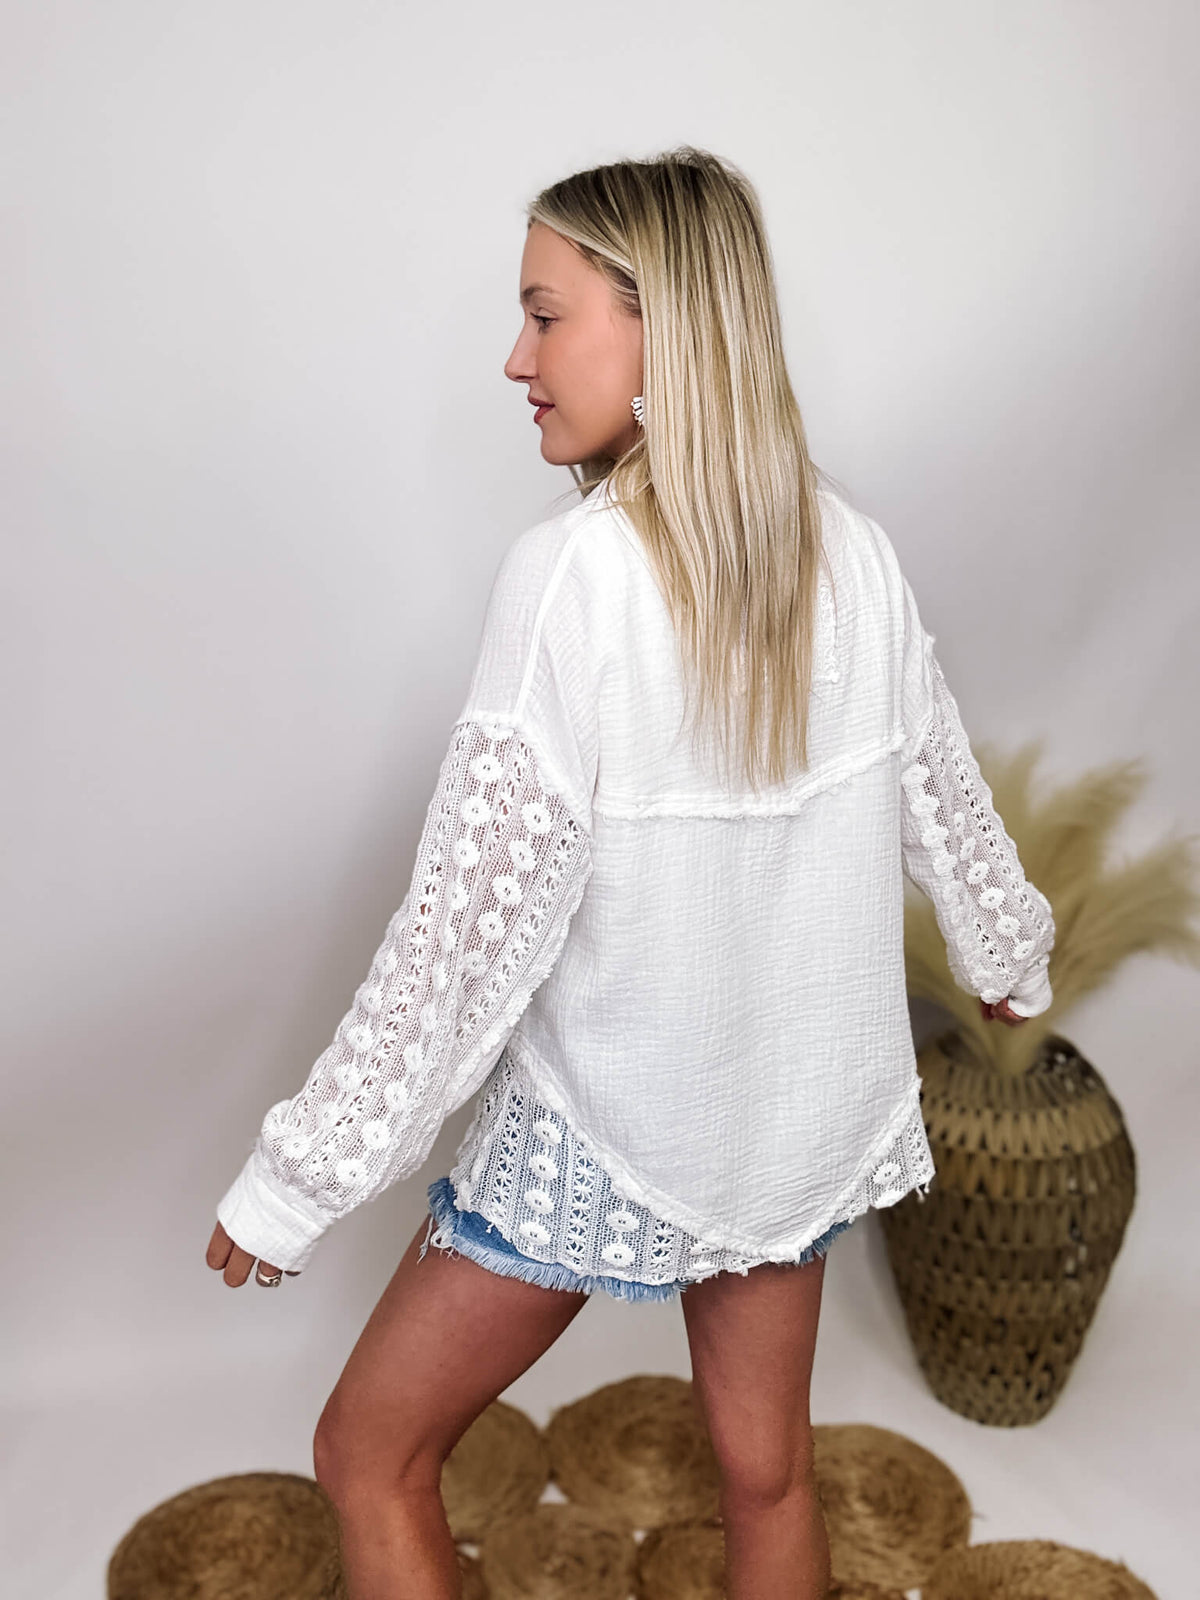 Andree by Unit White  Long Sleeve Button Up Top Lace Crochet Details Two Chest Pockets Soft Cotton Gauze Material Lightweight Relaxed Fit 100% Cotton